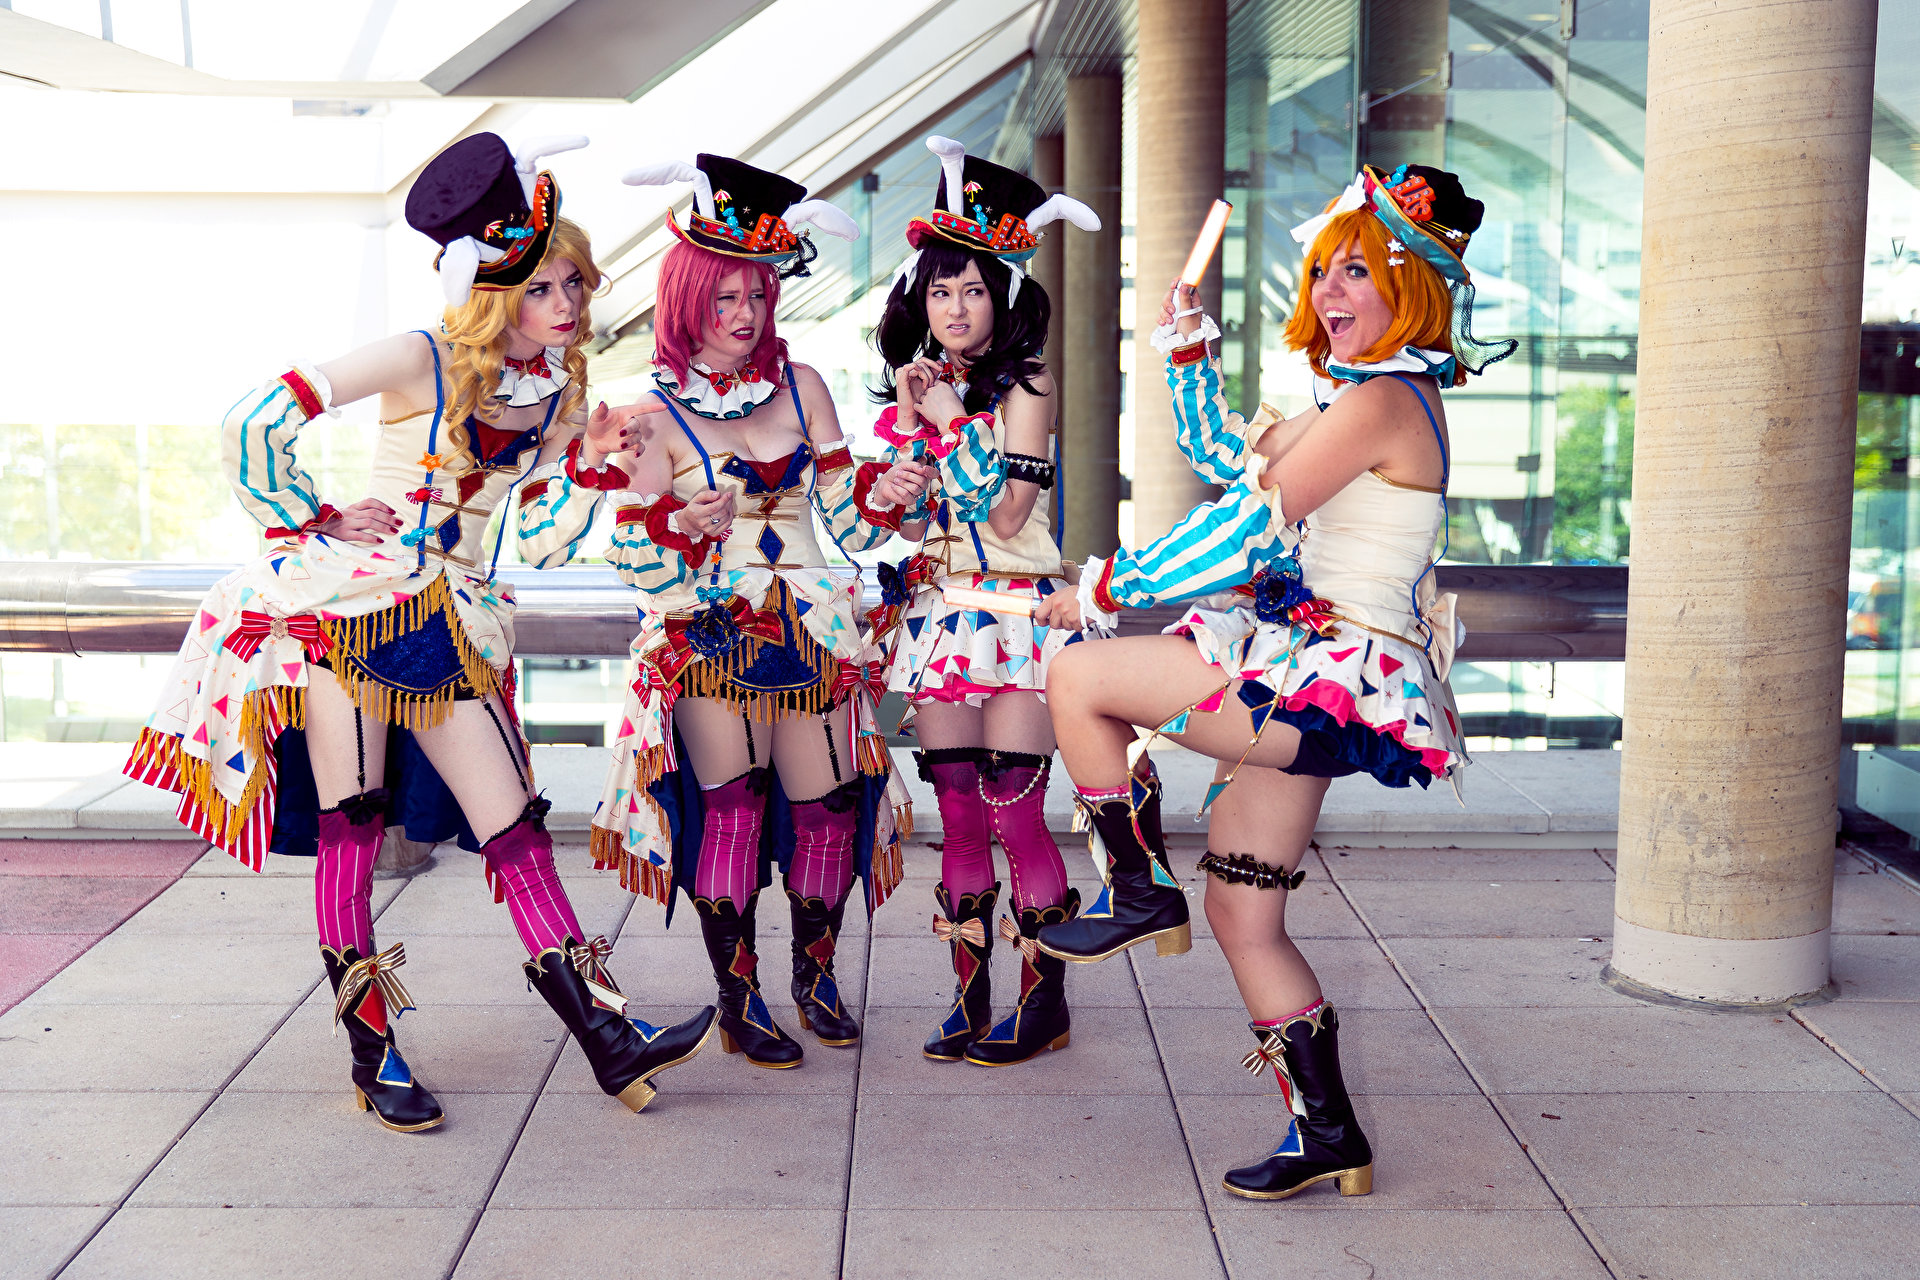 Cospix.net photo featuring Octography, StarsOfCassiopeia, and Vicious Cosplay